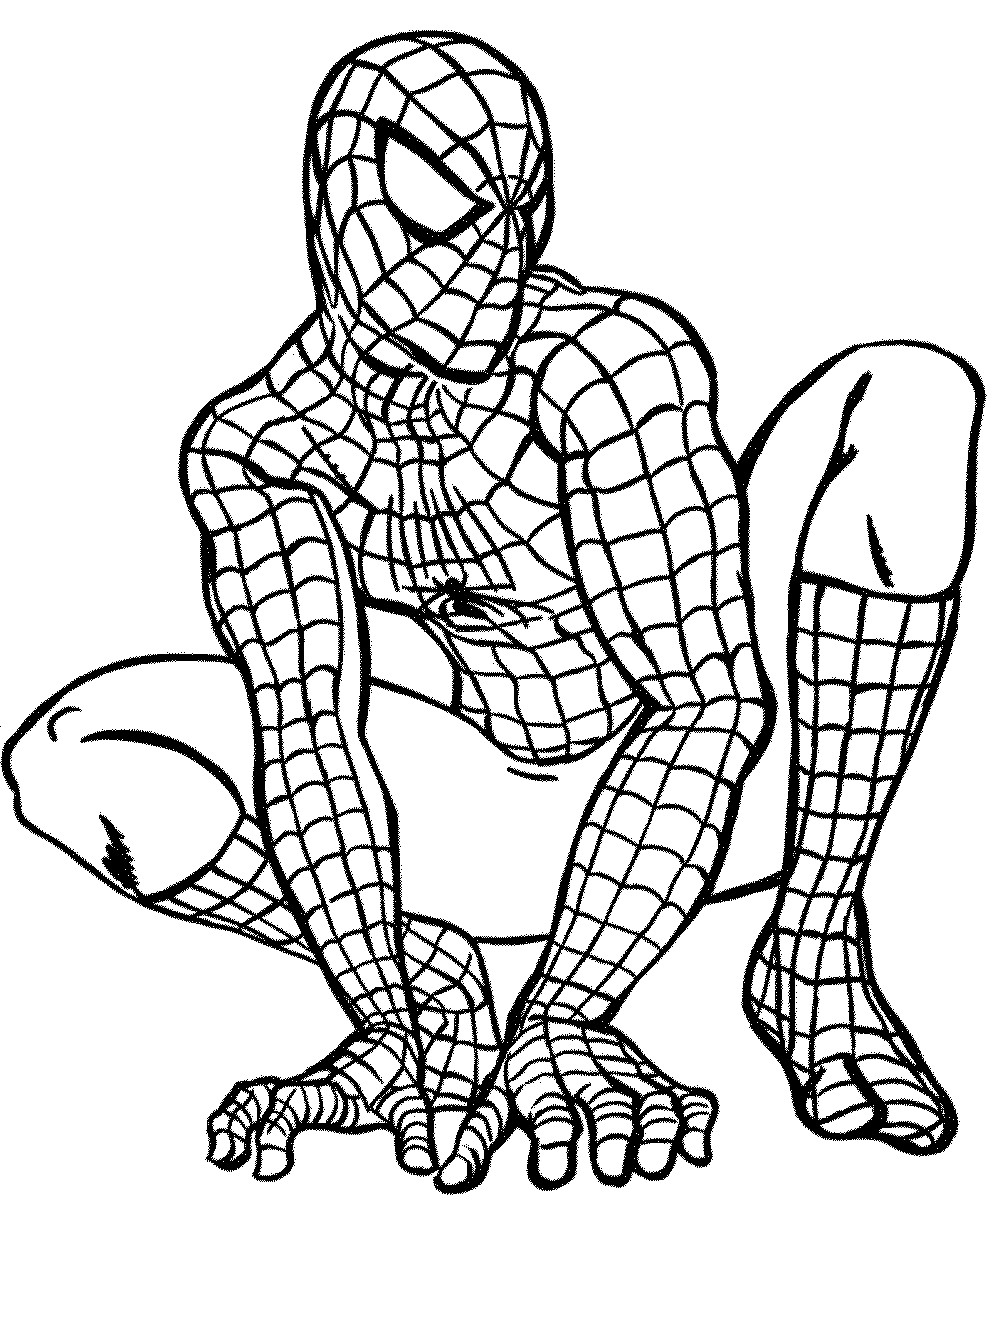 Coloring Sheets For Boys Spiderman
 Spiderman Coloring Pages 2019 Best Cool Funny